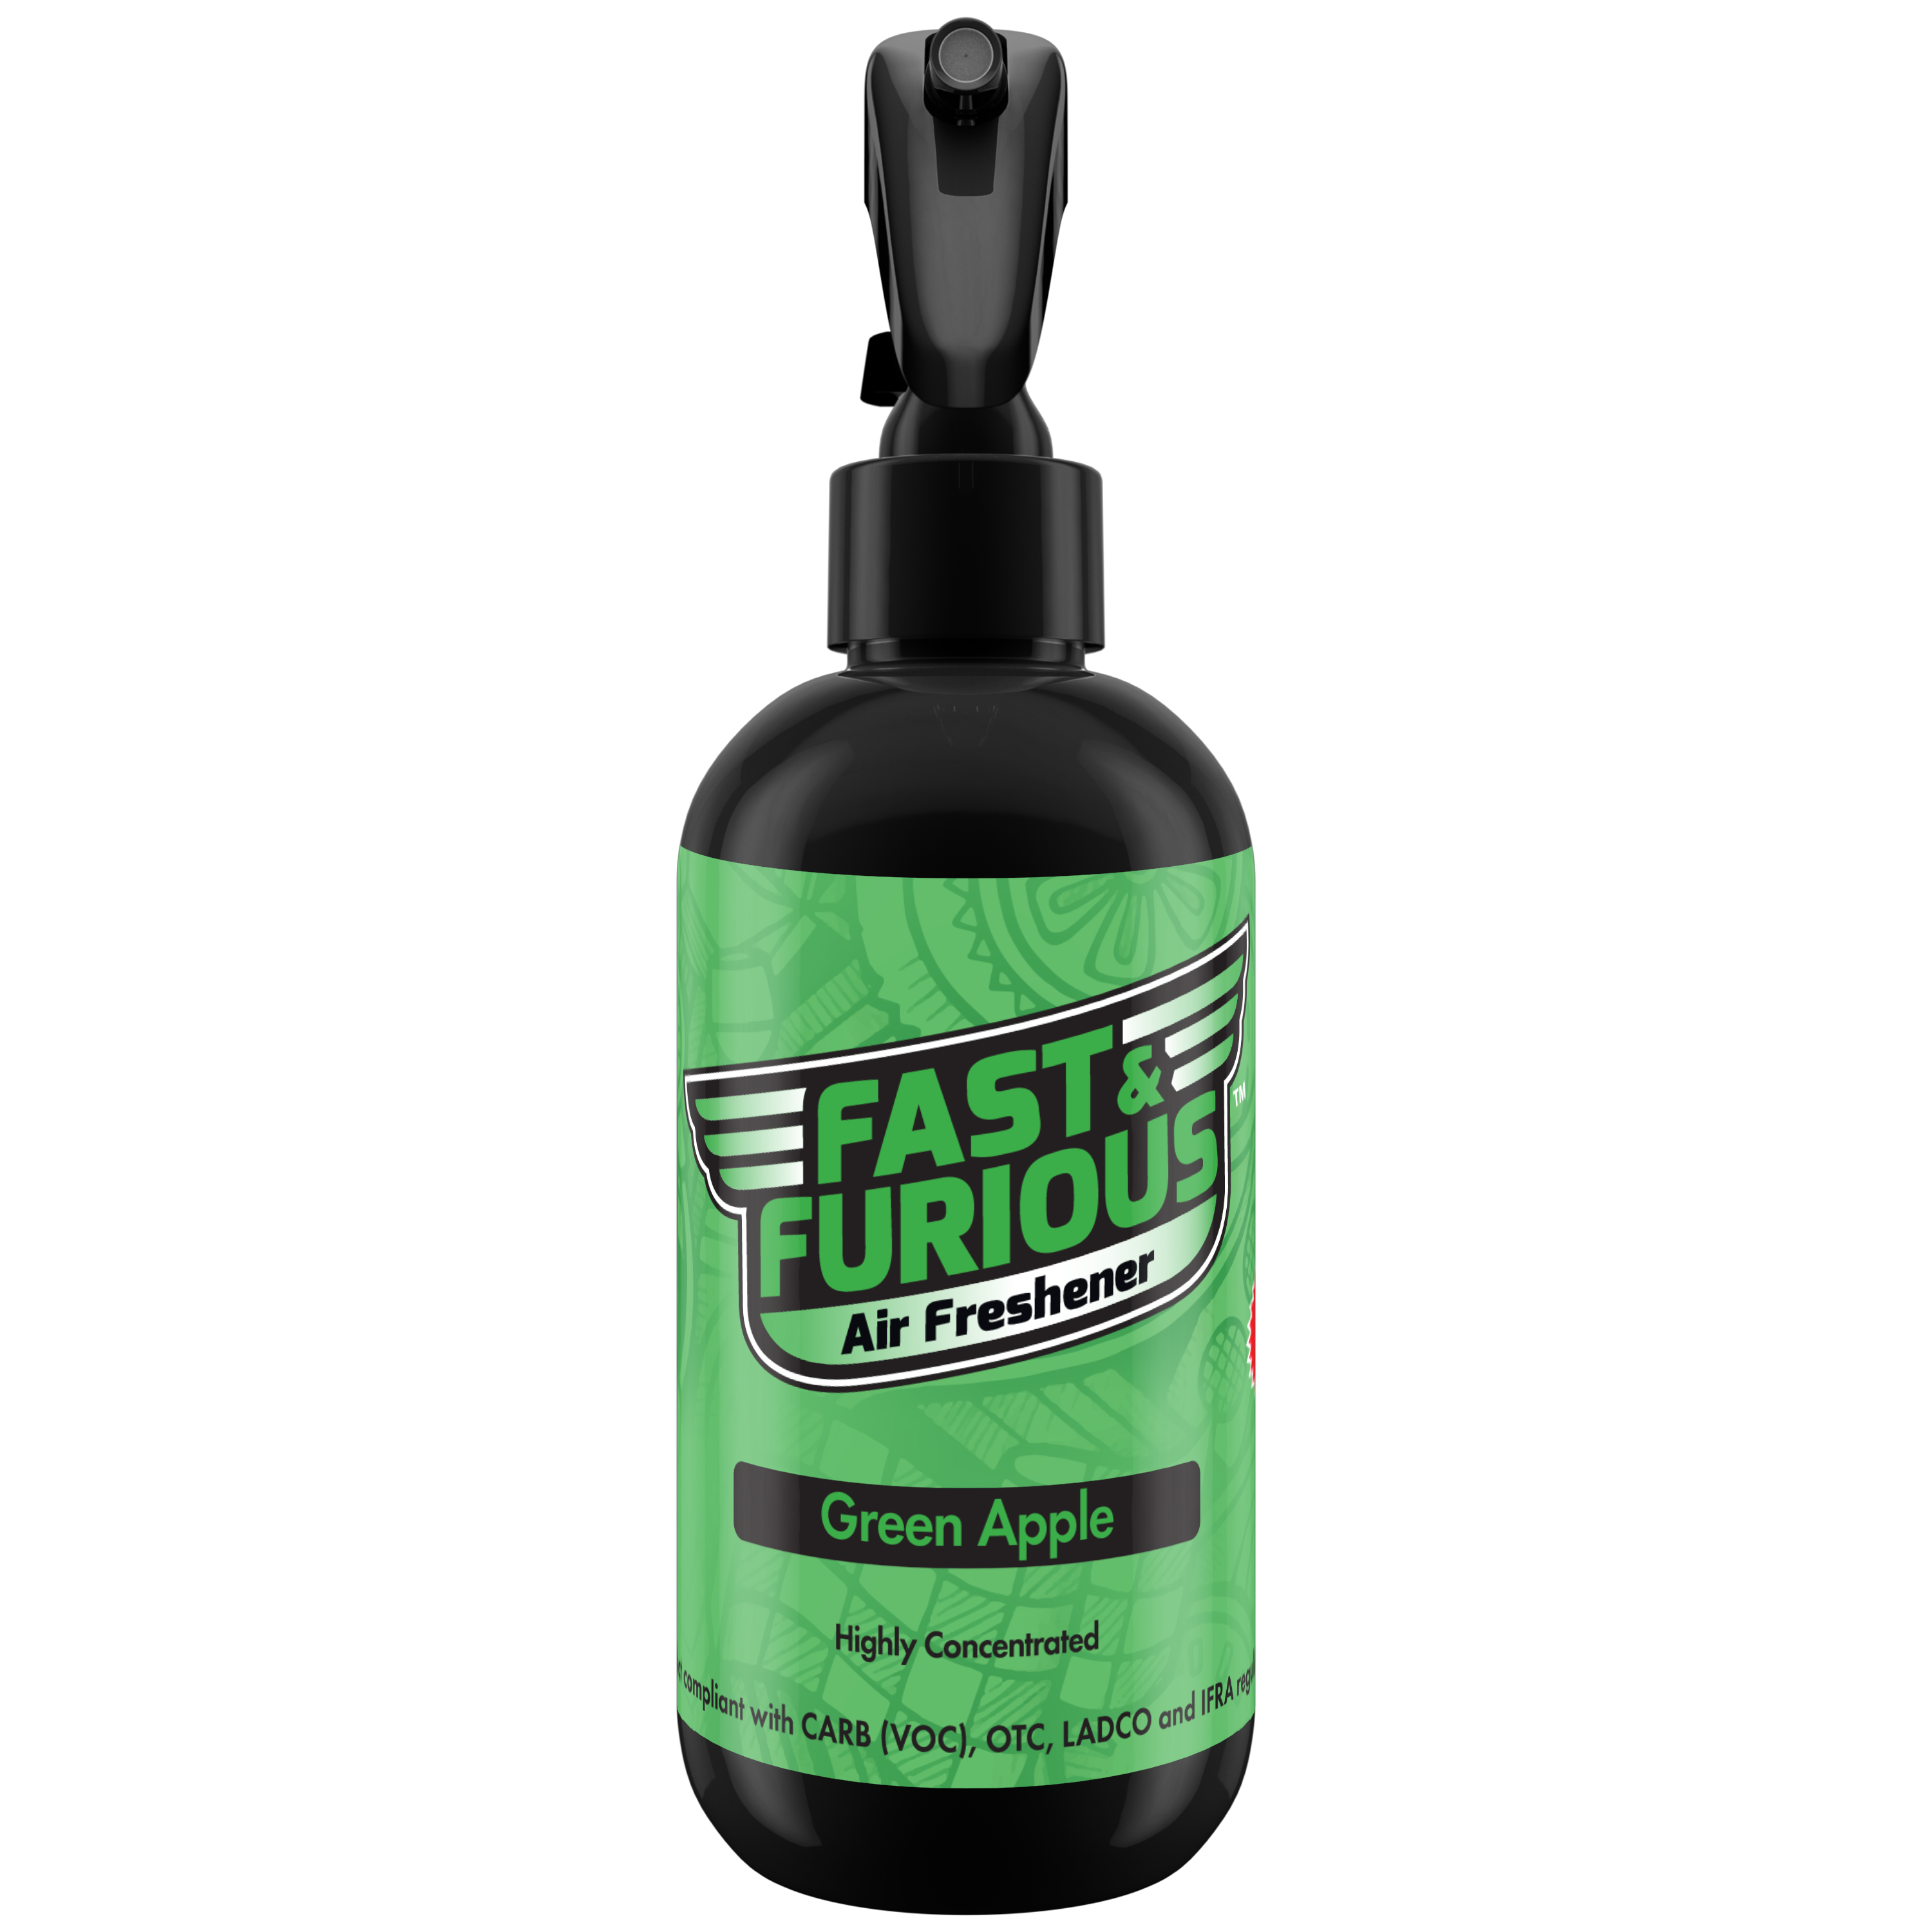 Fast and Furious Air Freshener - Green Apple Scent